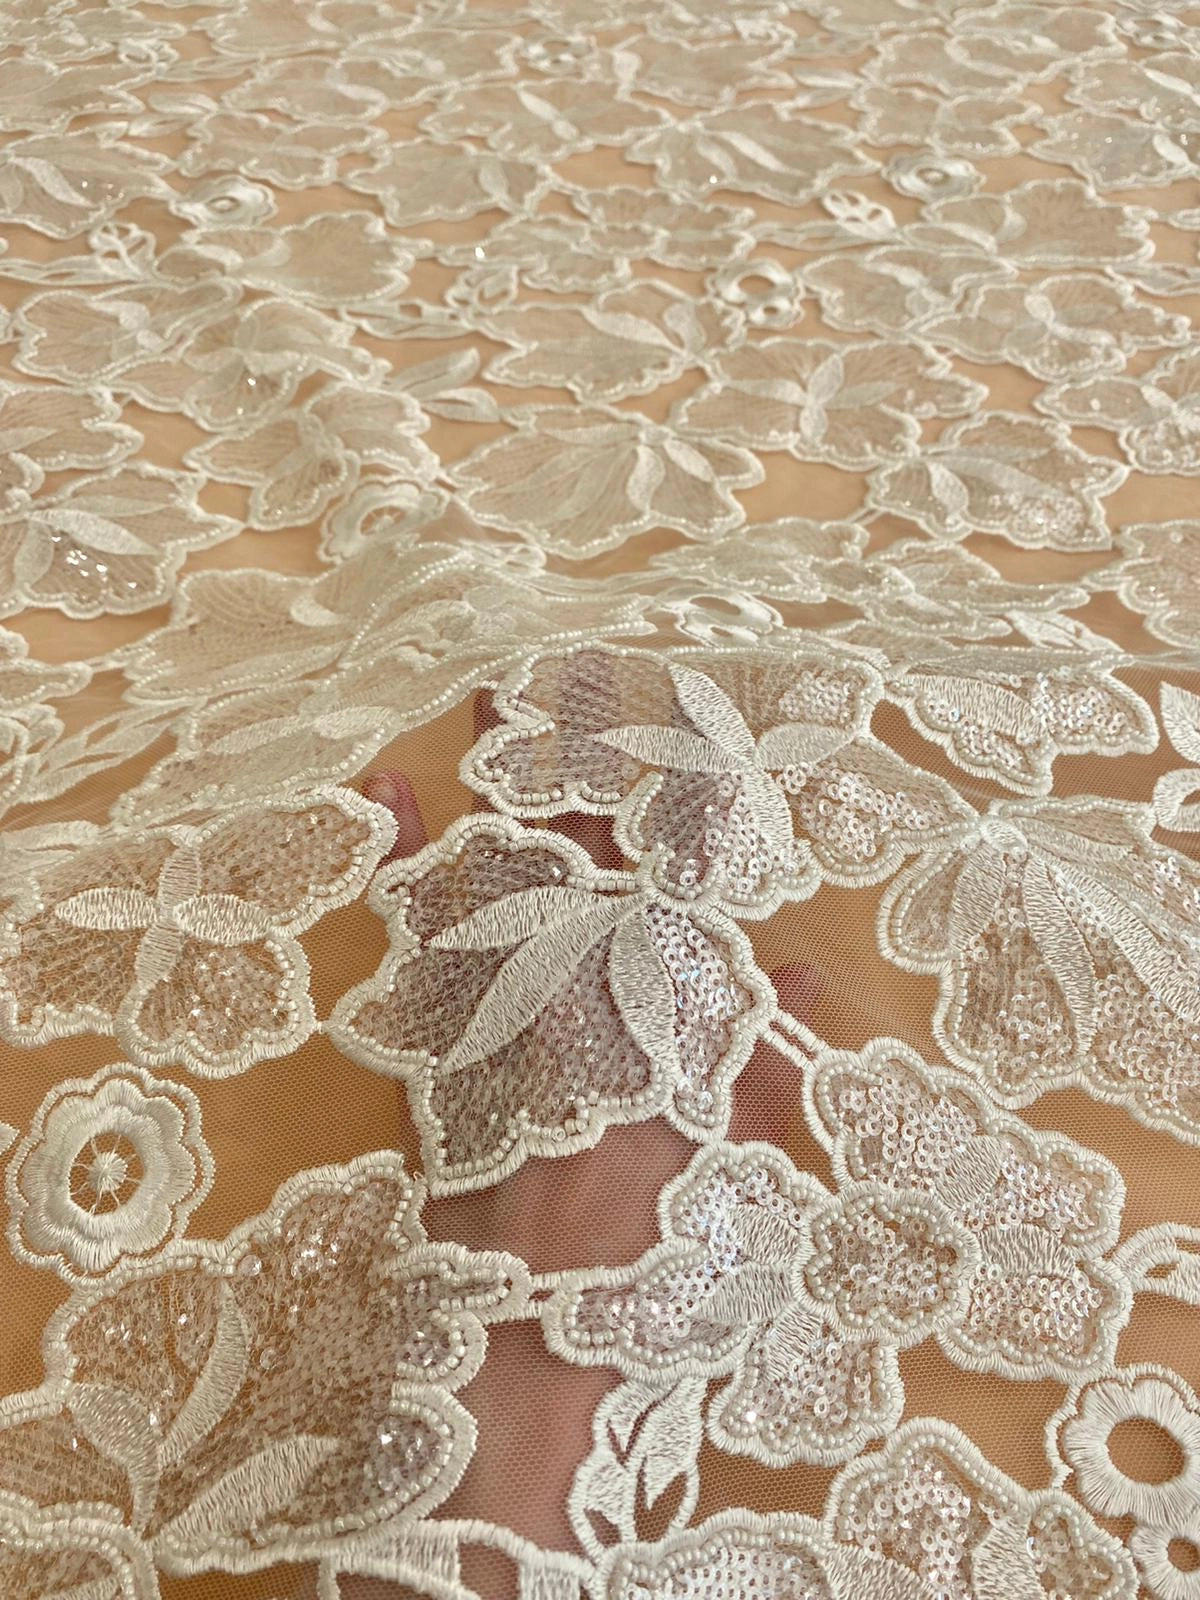 Lace with Floral Pattern with Pearls and Sequins